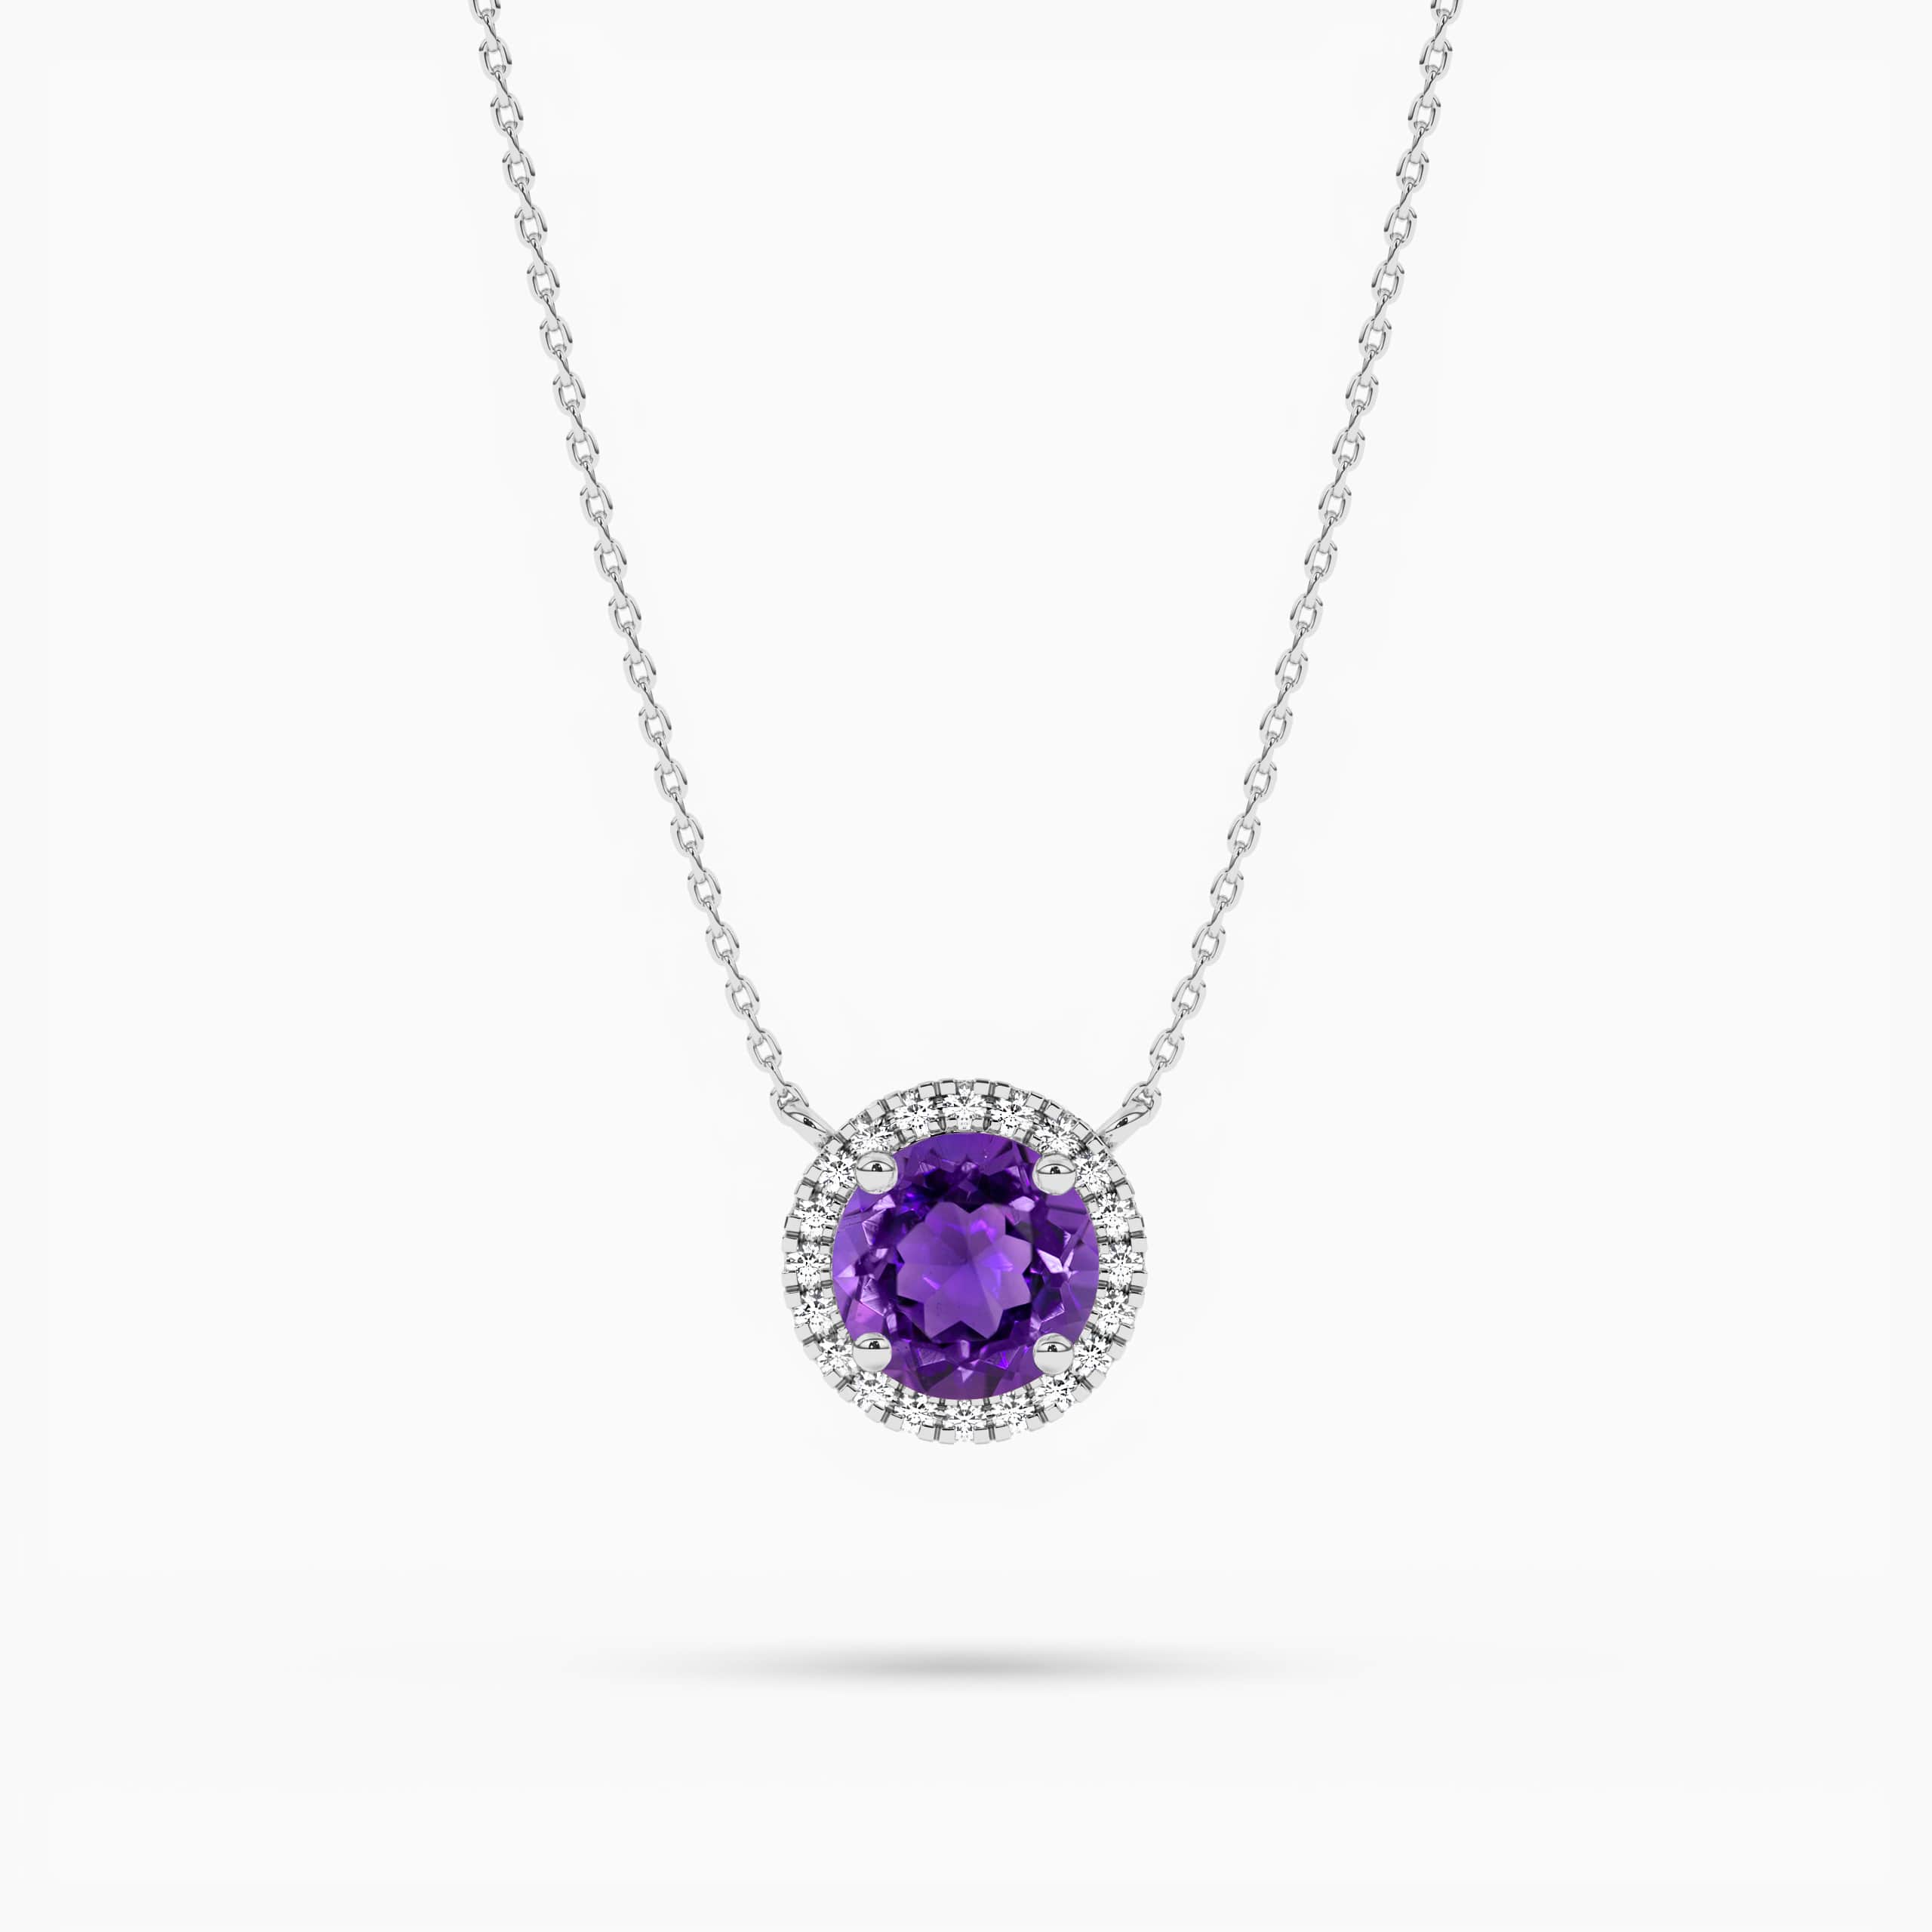 White Gold Round Amethyst and Diamond Halo Pendant Necklace